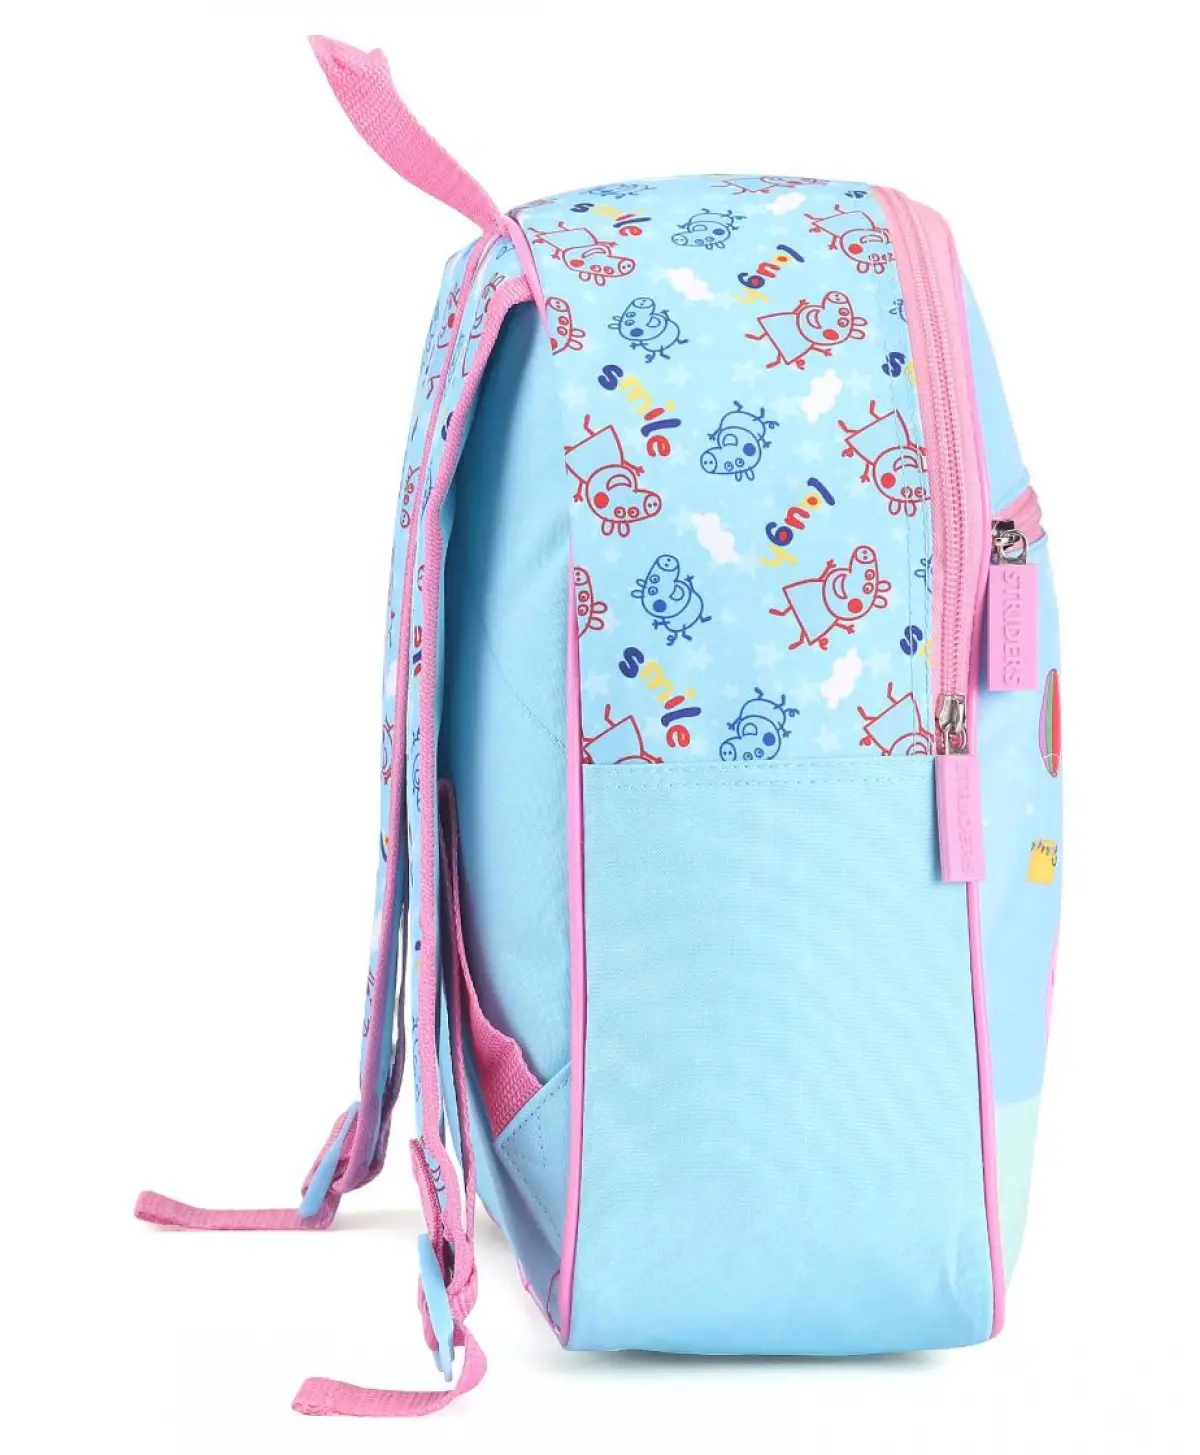 Striders 13 inches Peppa Pig-Inspired School Bag for Little Explorers Multicolor For Kids Ages 2Y+